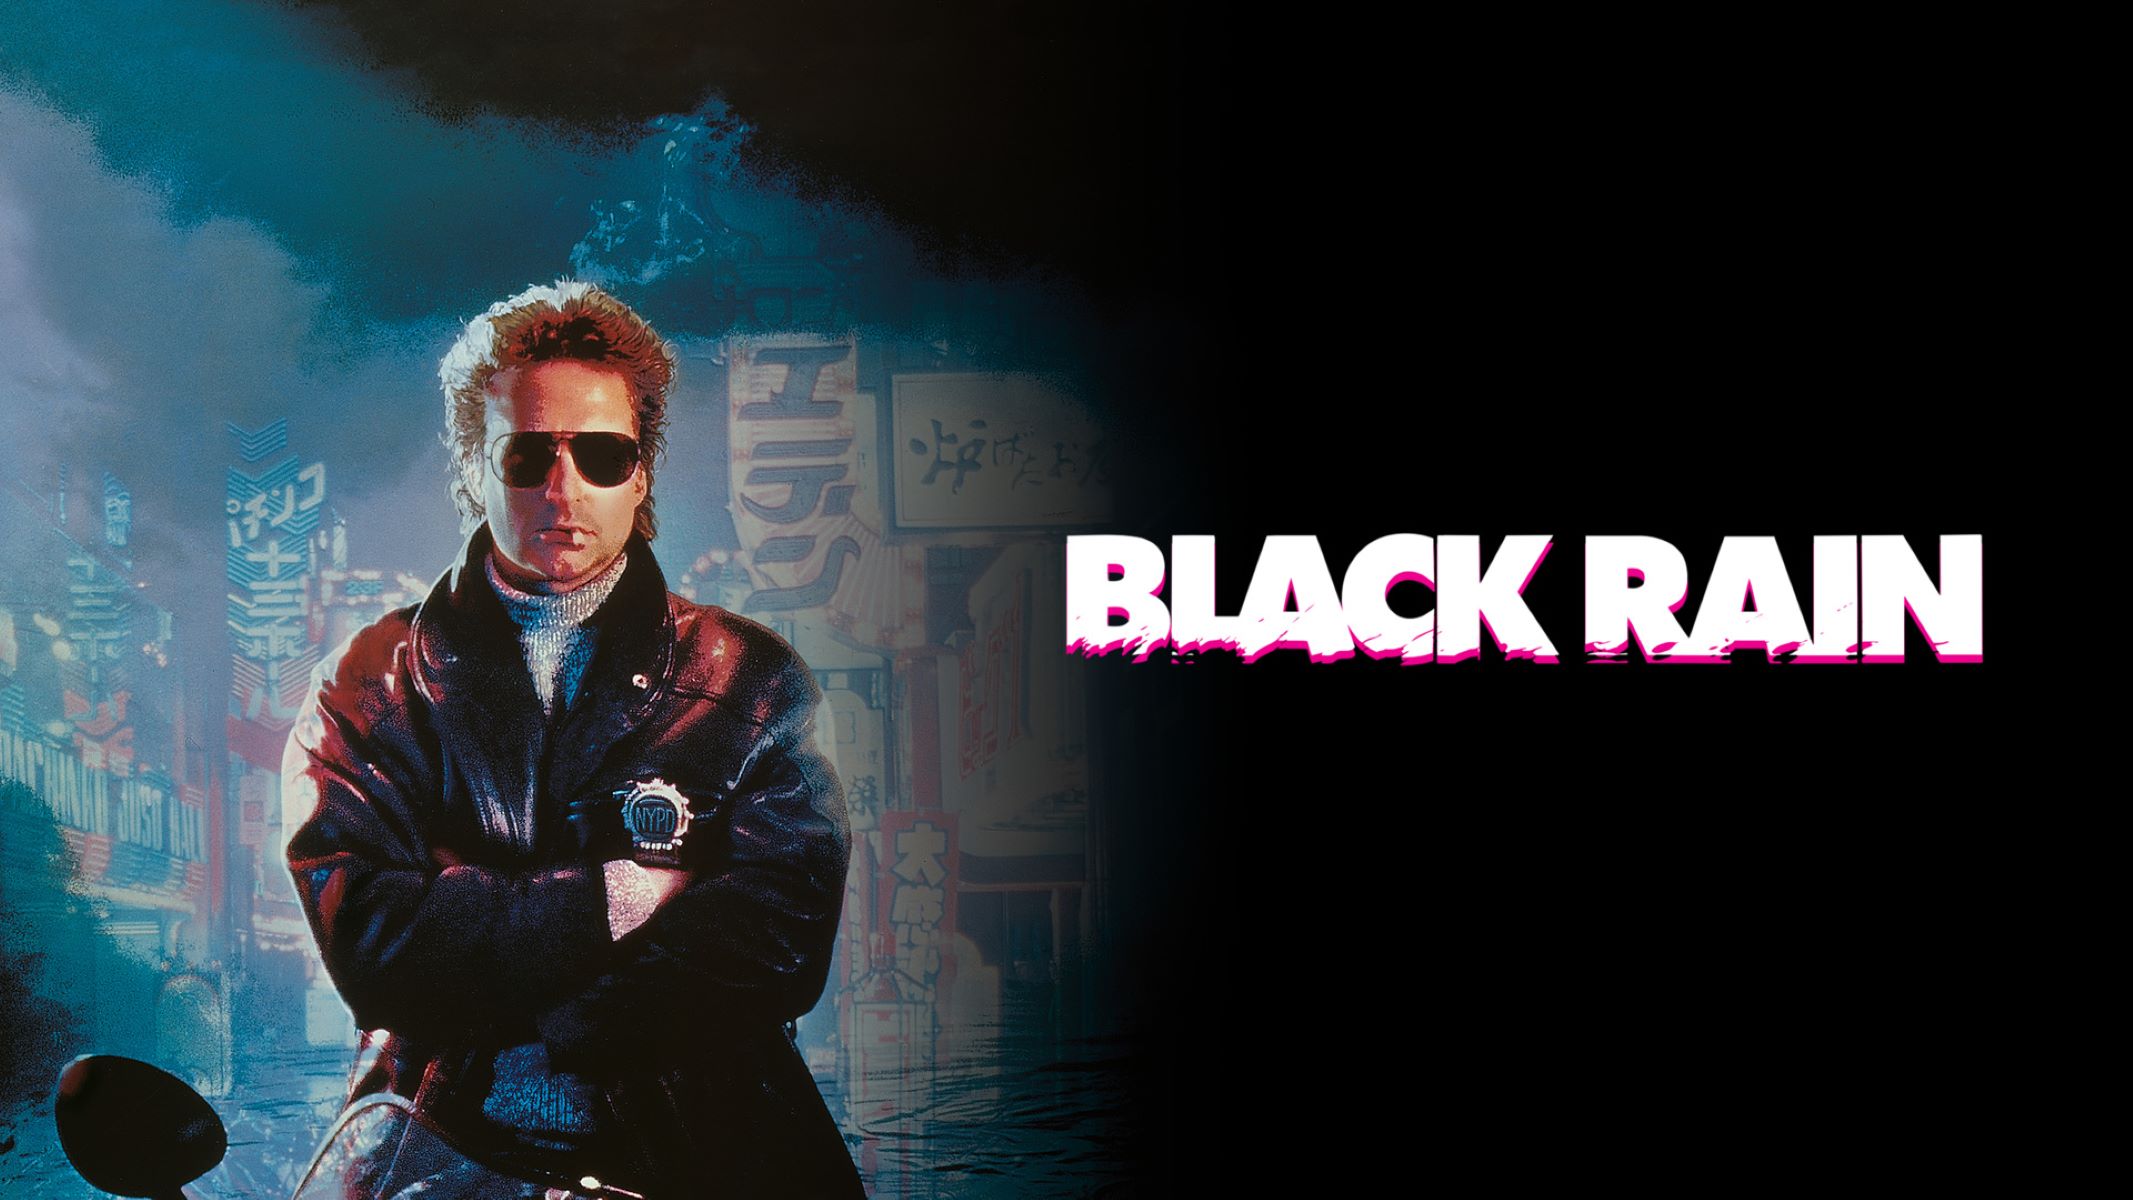 44-facts-about-the-movie-black-rain